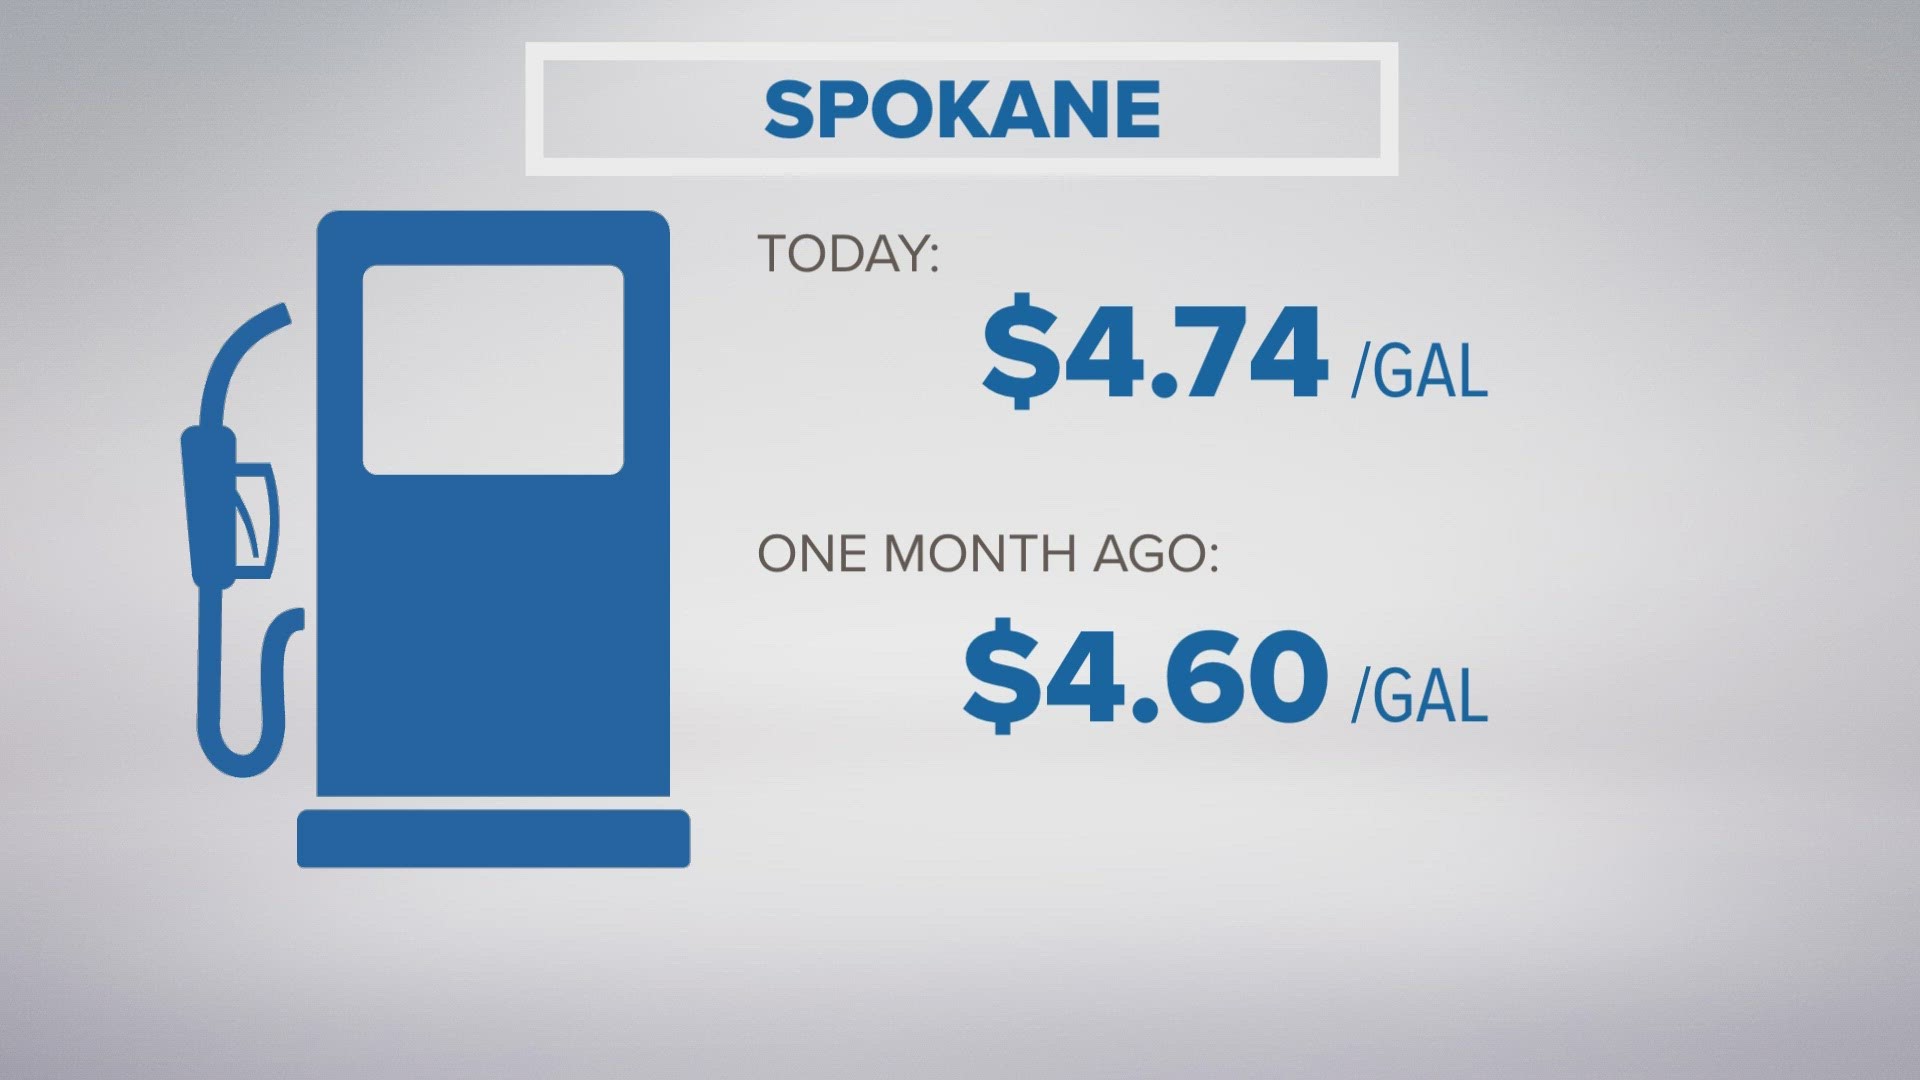 In Spokane, the average price for a gallon of gas is currently $4.90, which is 16.2 cents higher than this time last week.